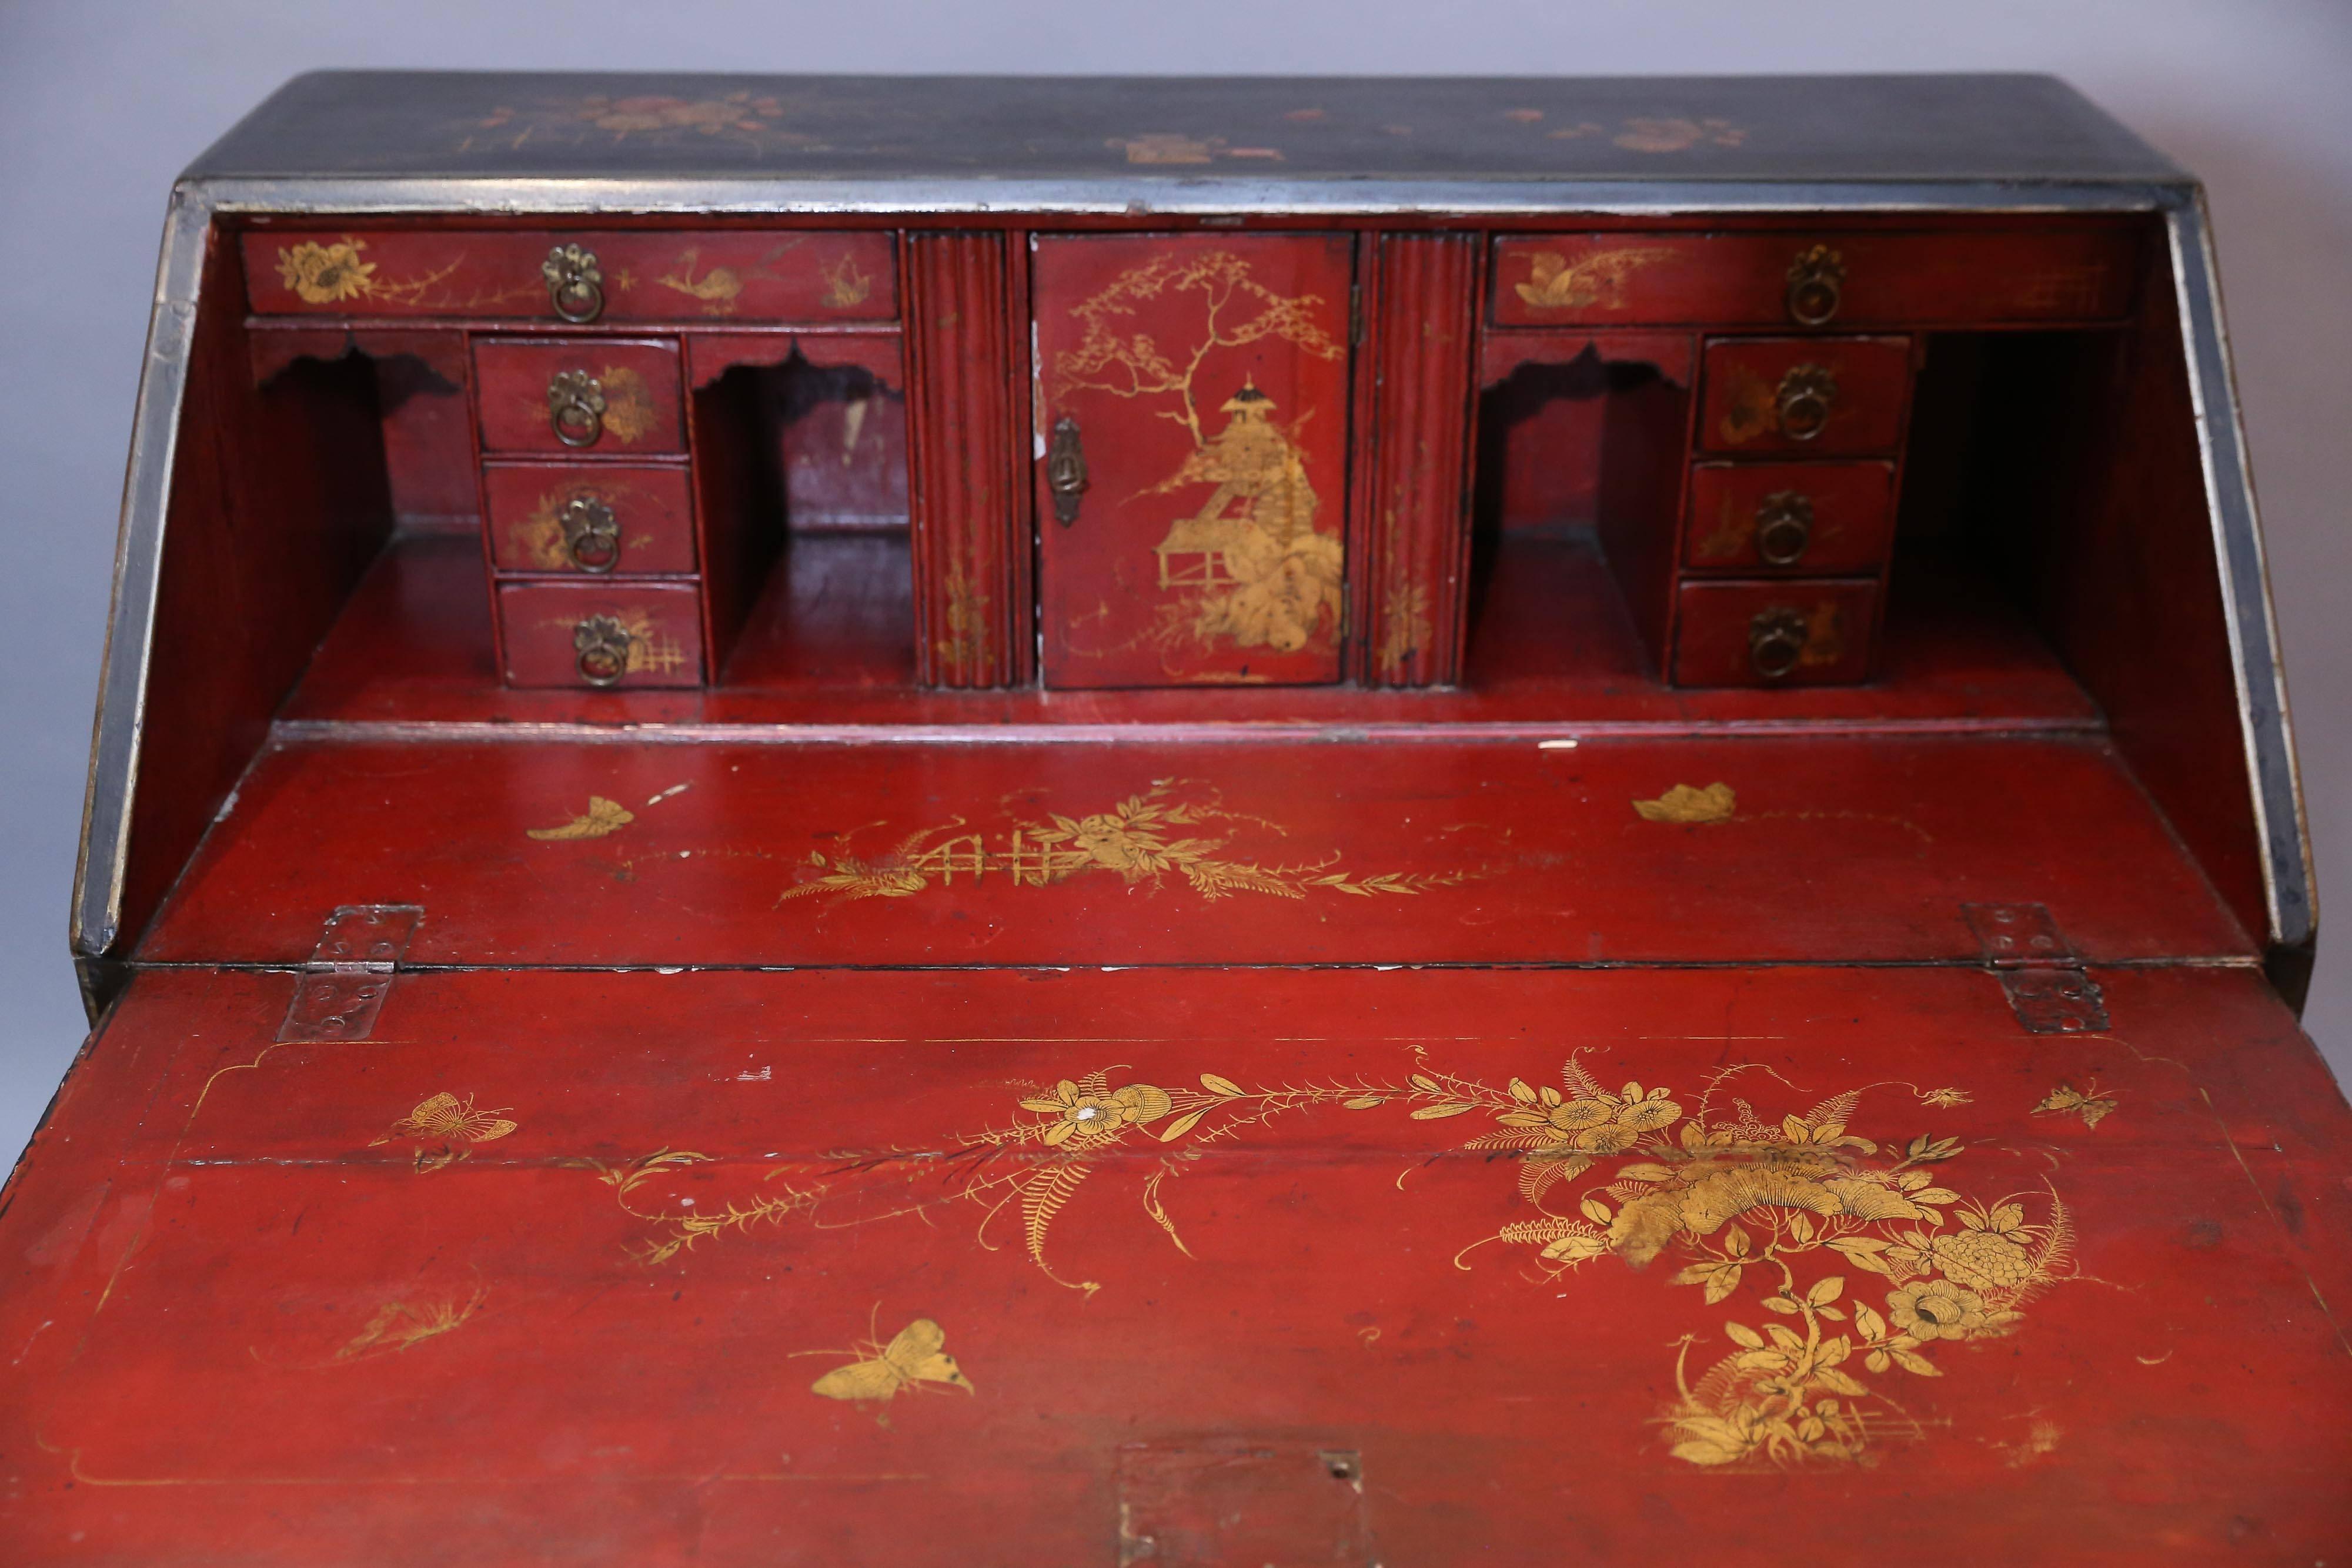 Antique English Black Chinoiserie Slant Desk with a Vibrant Red Interior 3